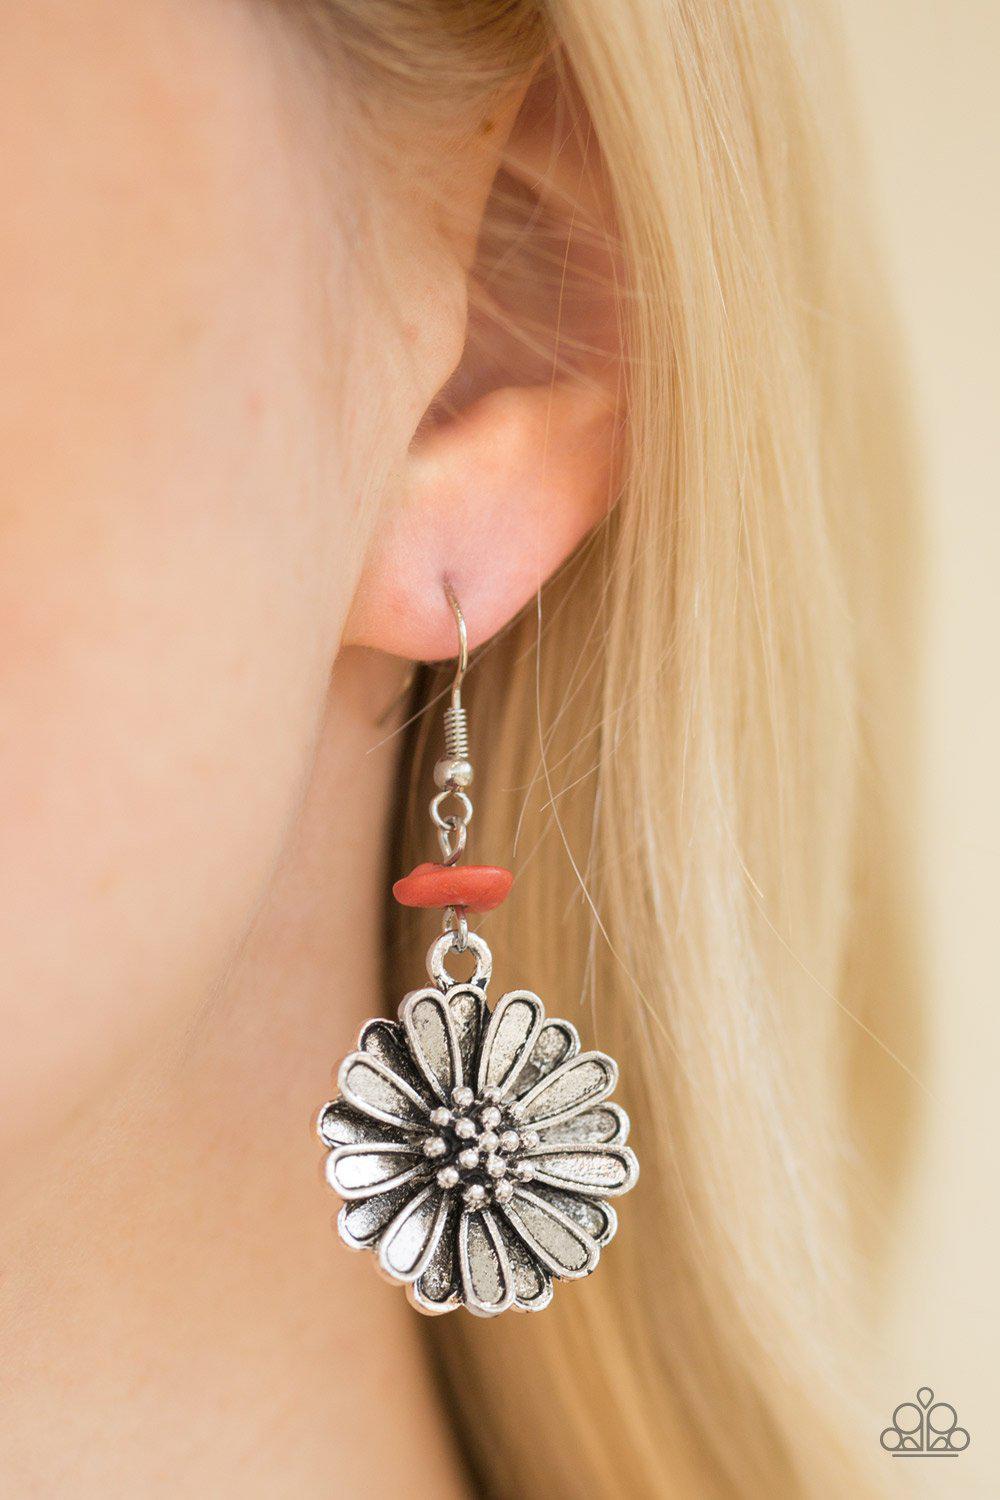 Prairie Garden Orange and Silver Flower Earrings - Paparazzi Accessories-CarasShop.com - $5 Jewelry by Cara Jewels